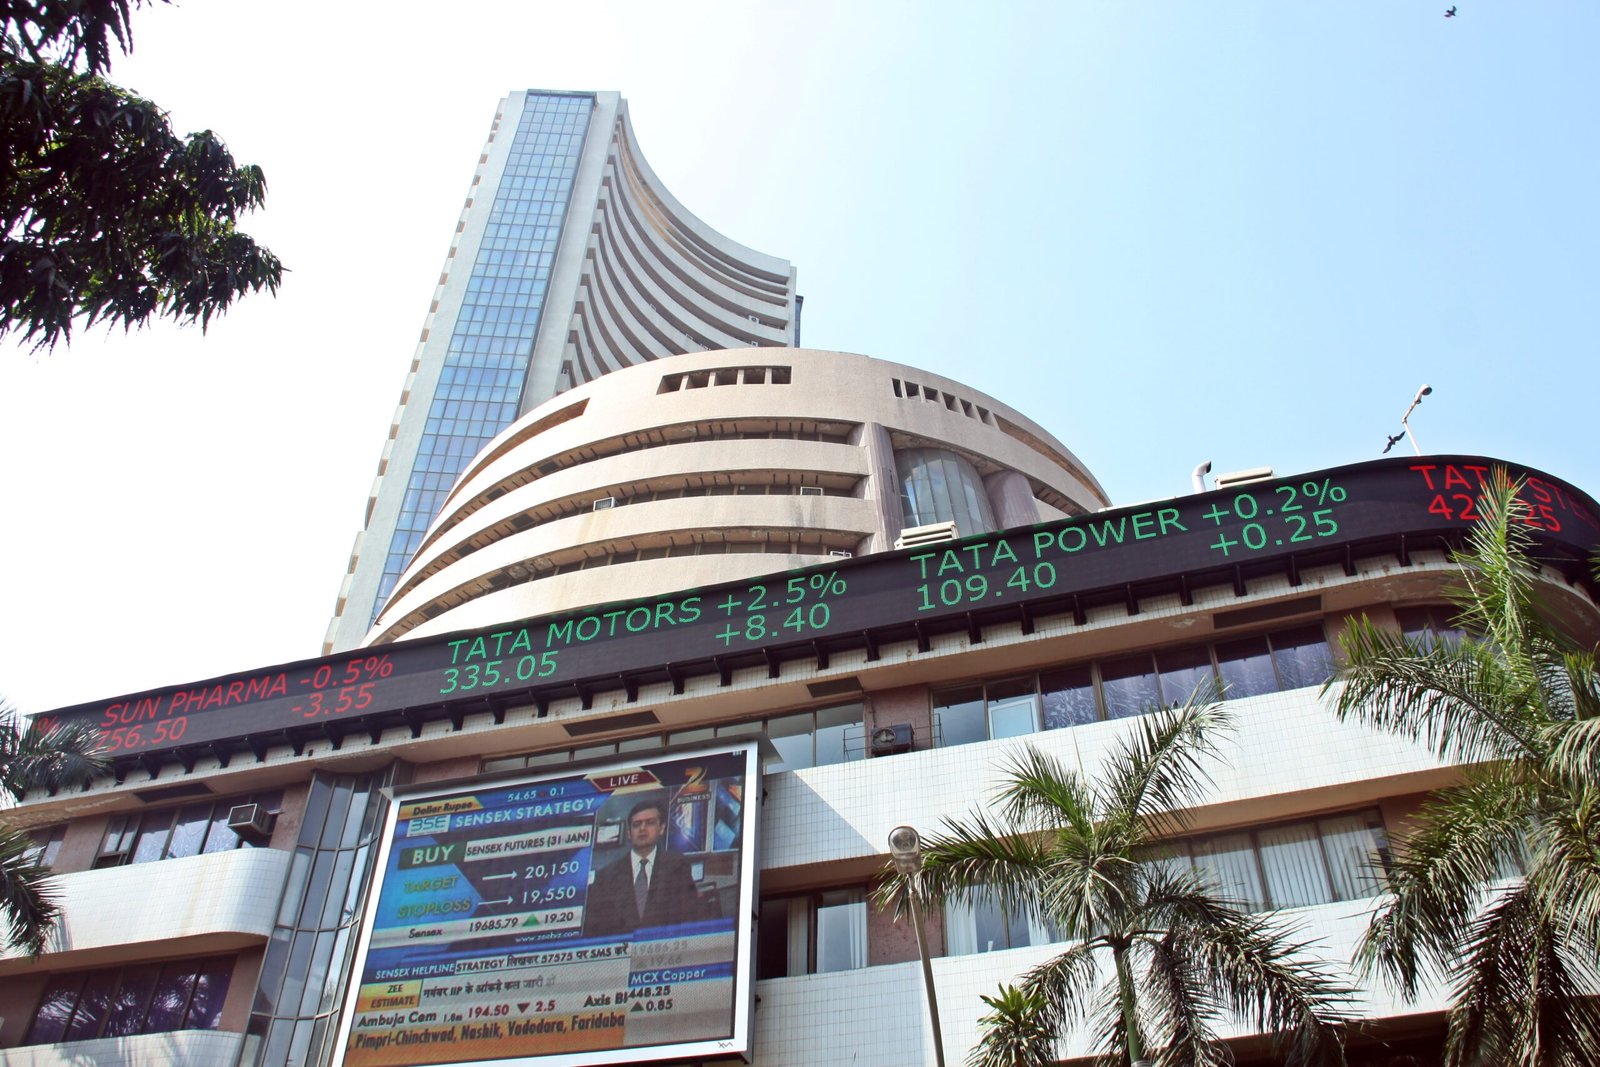 Bombay Stock Exchange also known as the BSE Limited(BSE, मुंबई रोखे बाजार), is an Indian stock